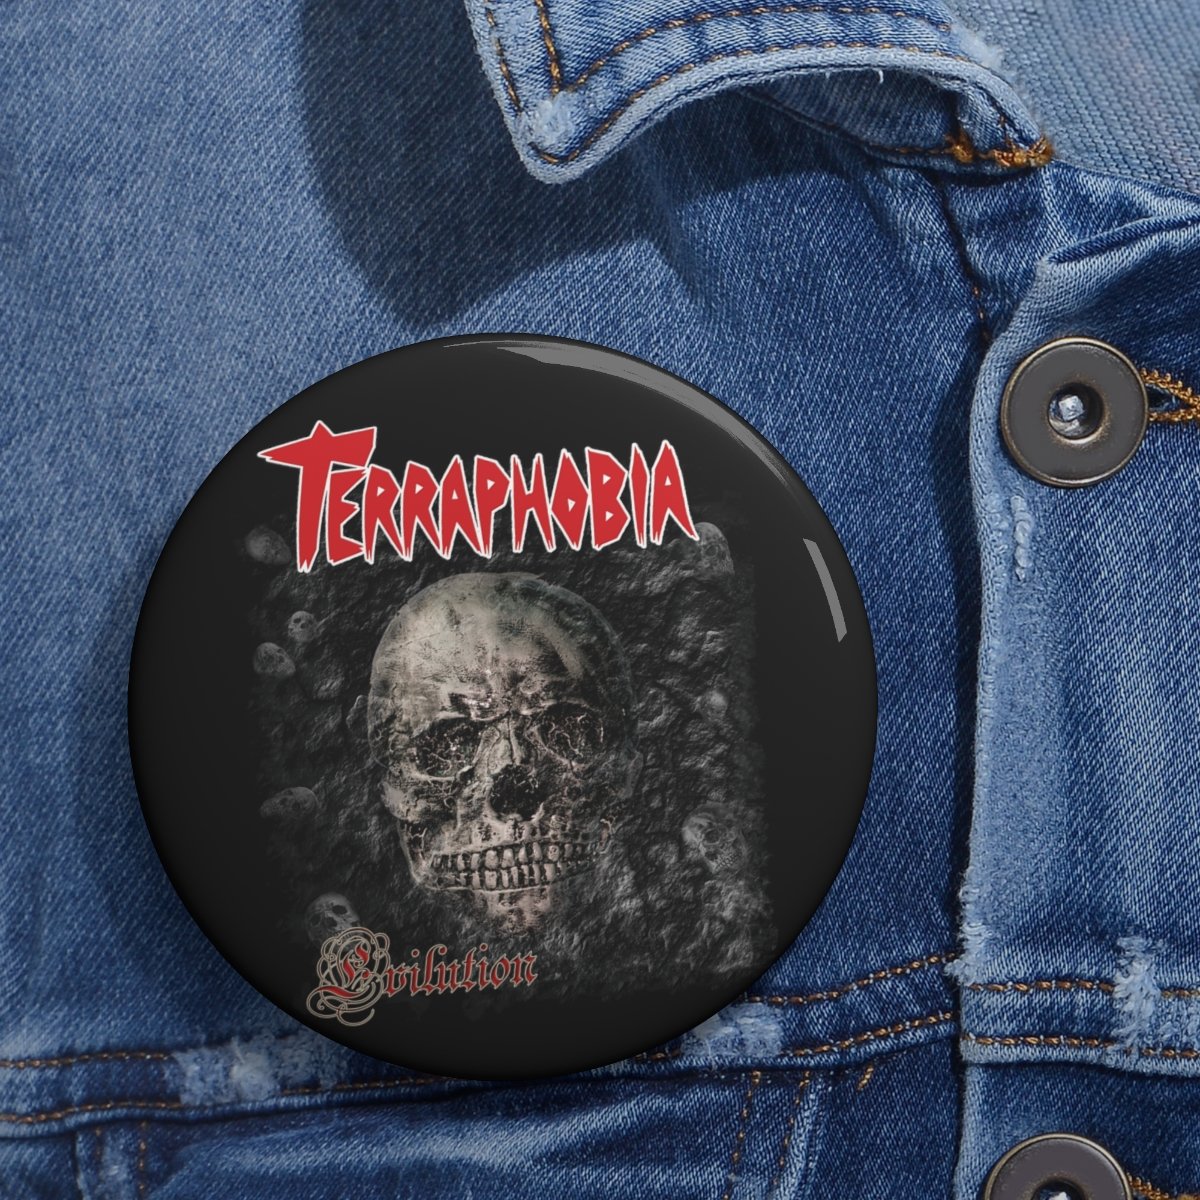 Terraphobia – Evilution Pin Buttons